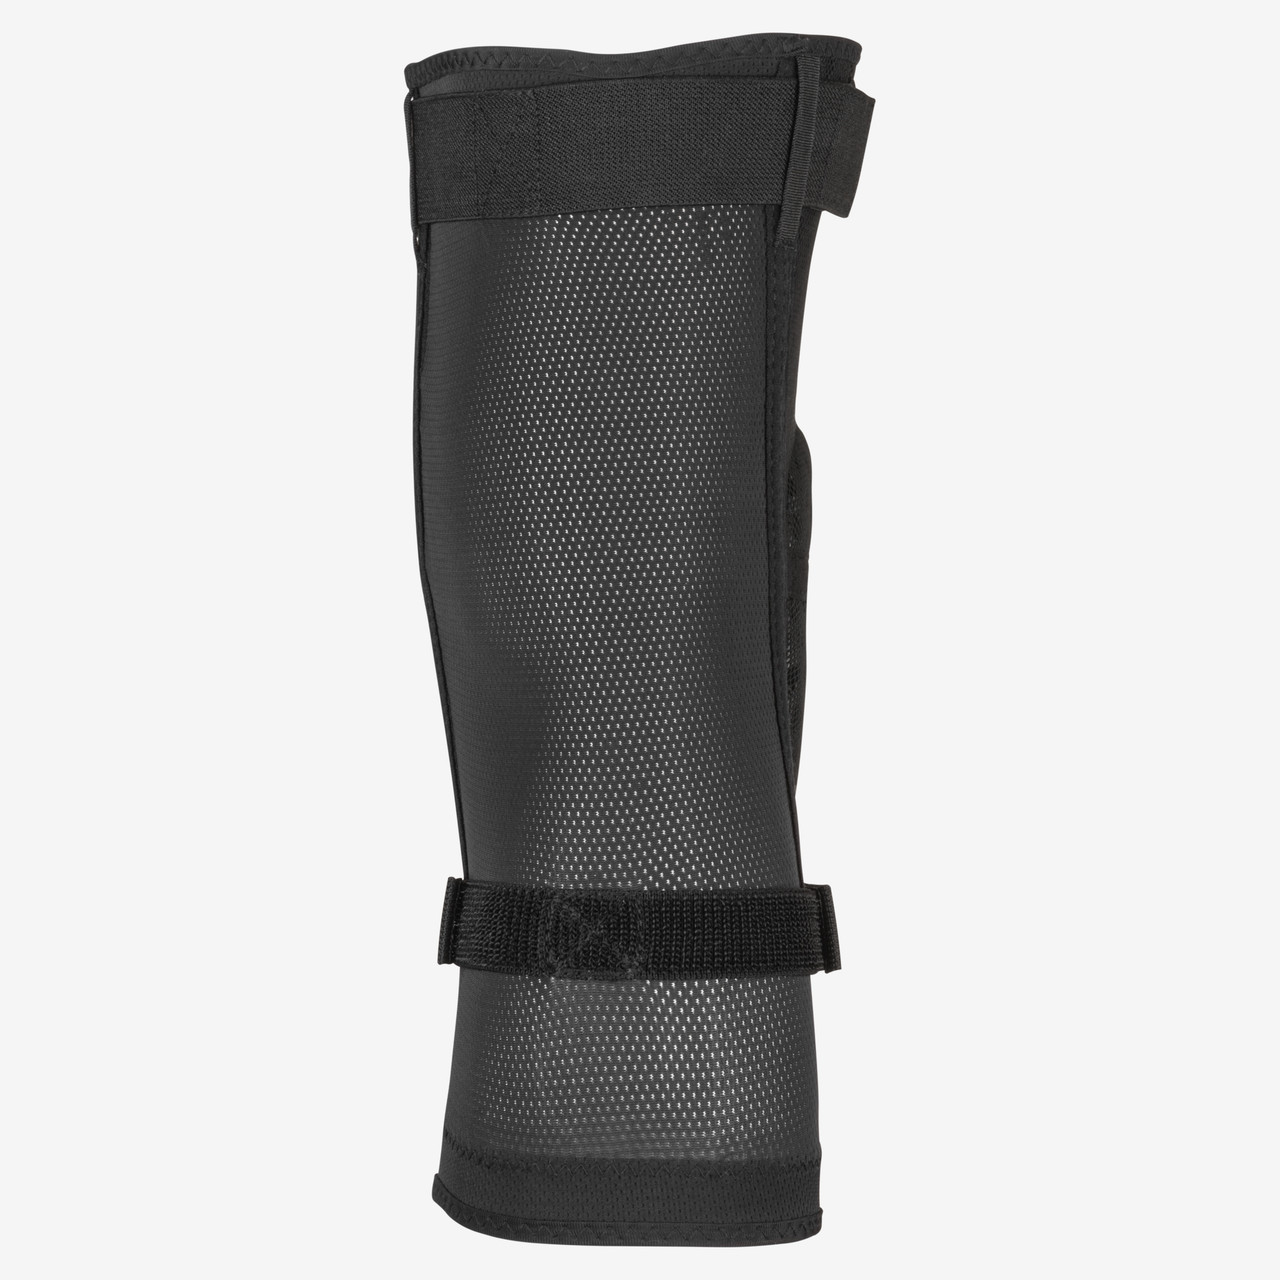 Cypher Knee Guard | FLY Racing